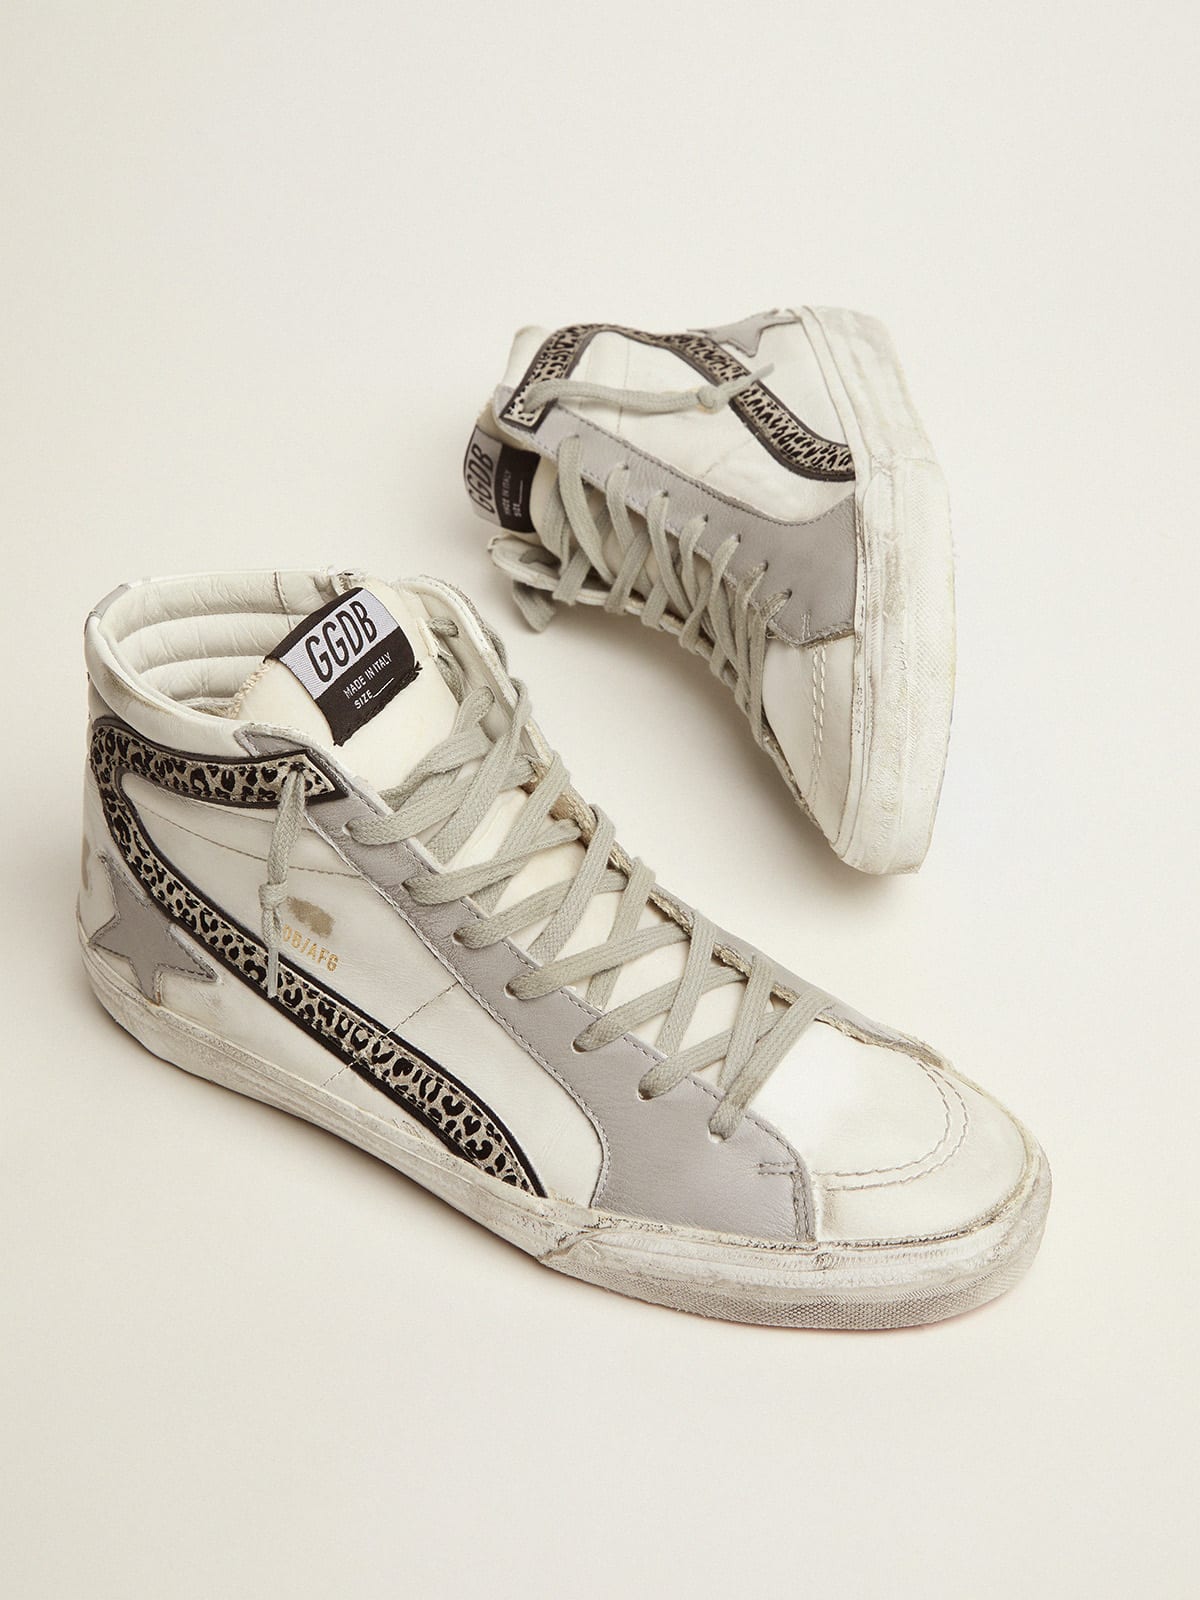 Golden Goose - Slide sneakers with white leather upper and animal-print suede flash in 